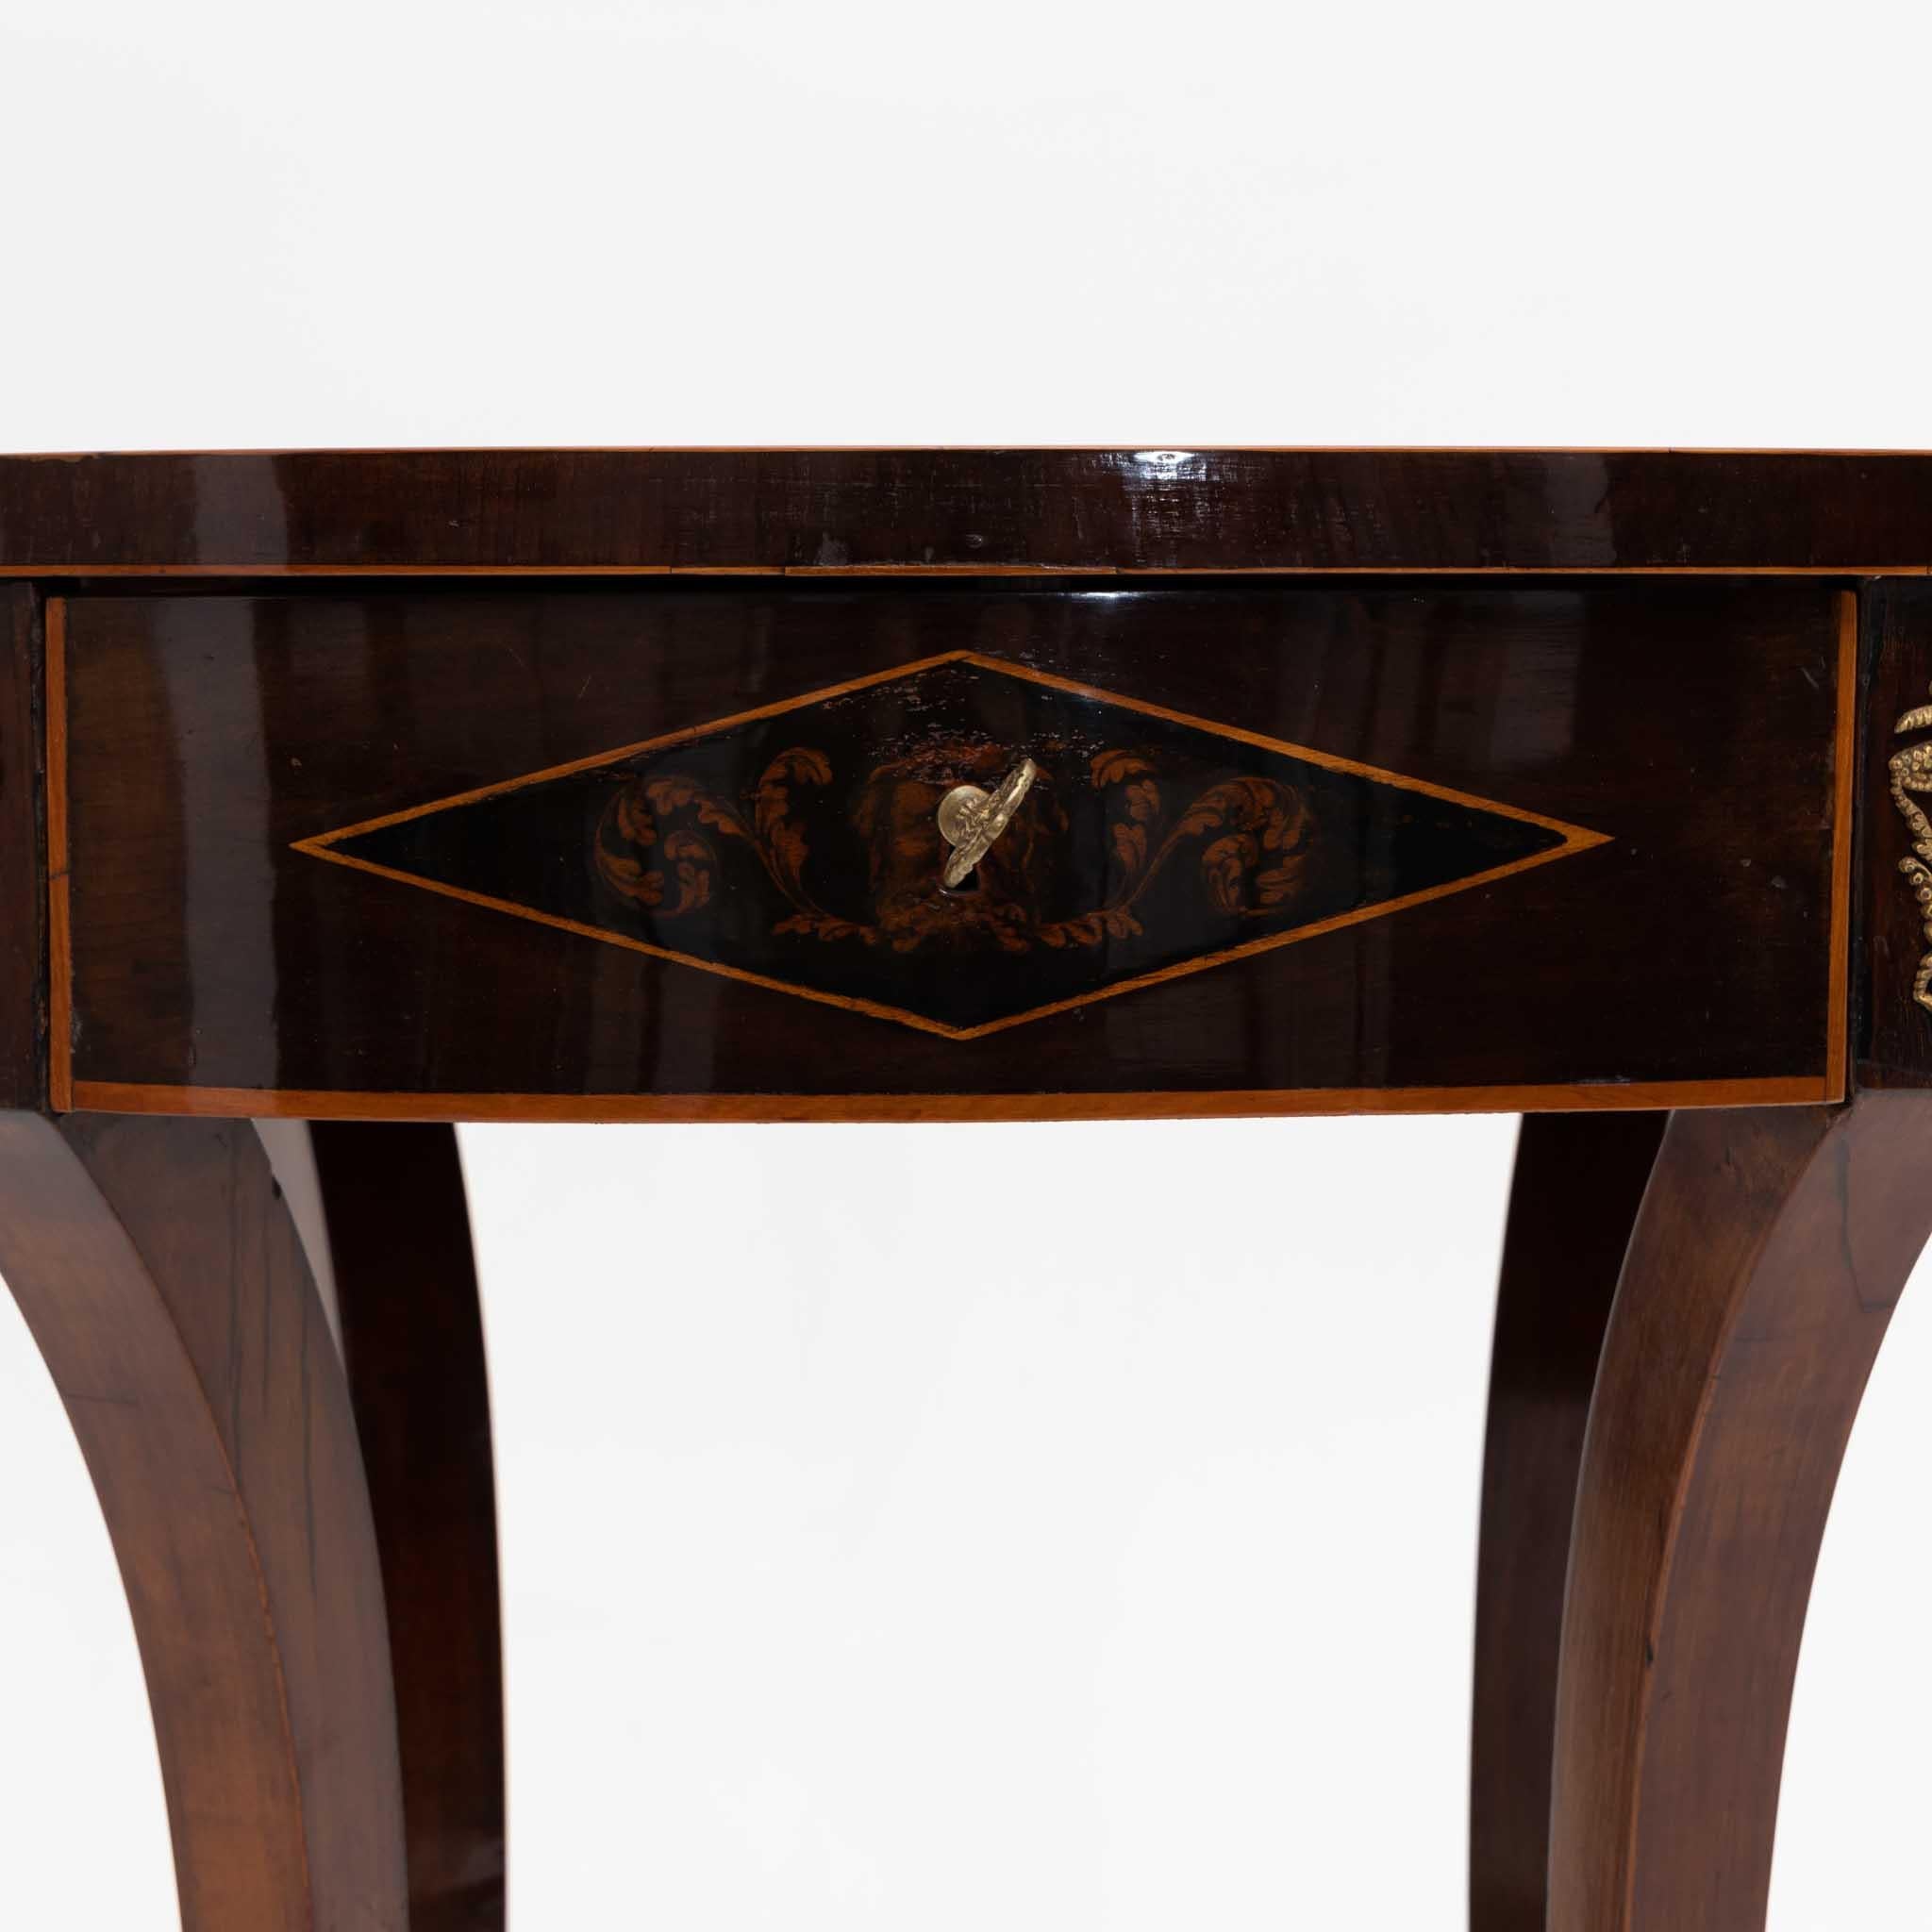 Empire sewing table with socketed saber legs and a basket tray, adorned with an oval frame featuring fire-gilded fittings. The table includes a lockable drawer with diamond-shaped fields, embellished with vine-shaped inlays and delicate ink painting.